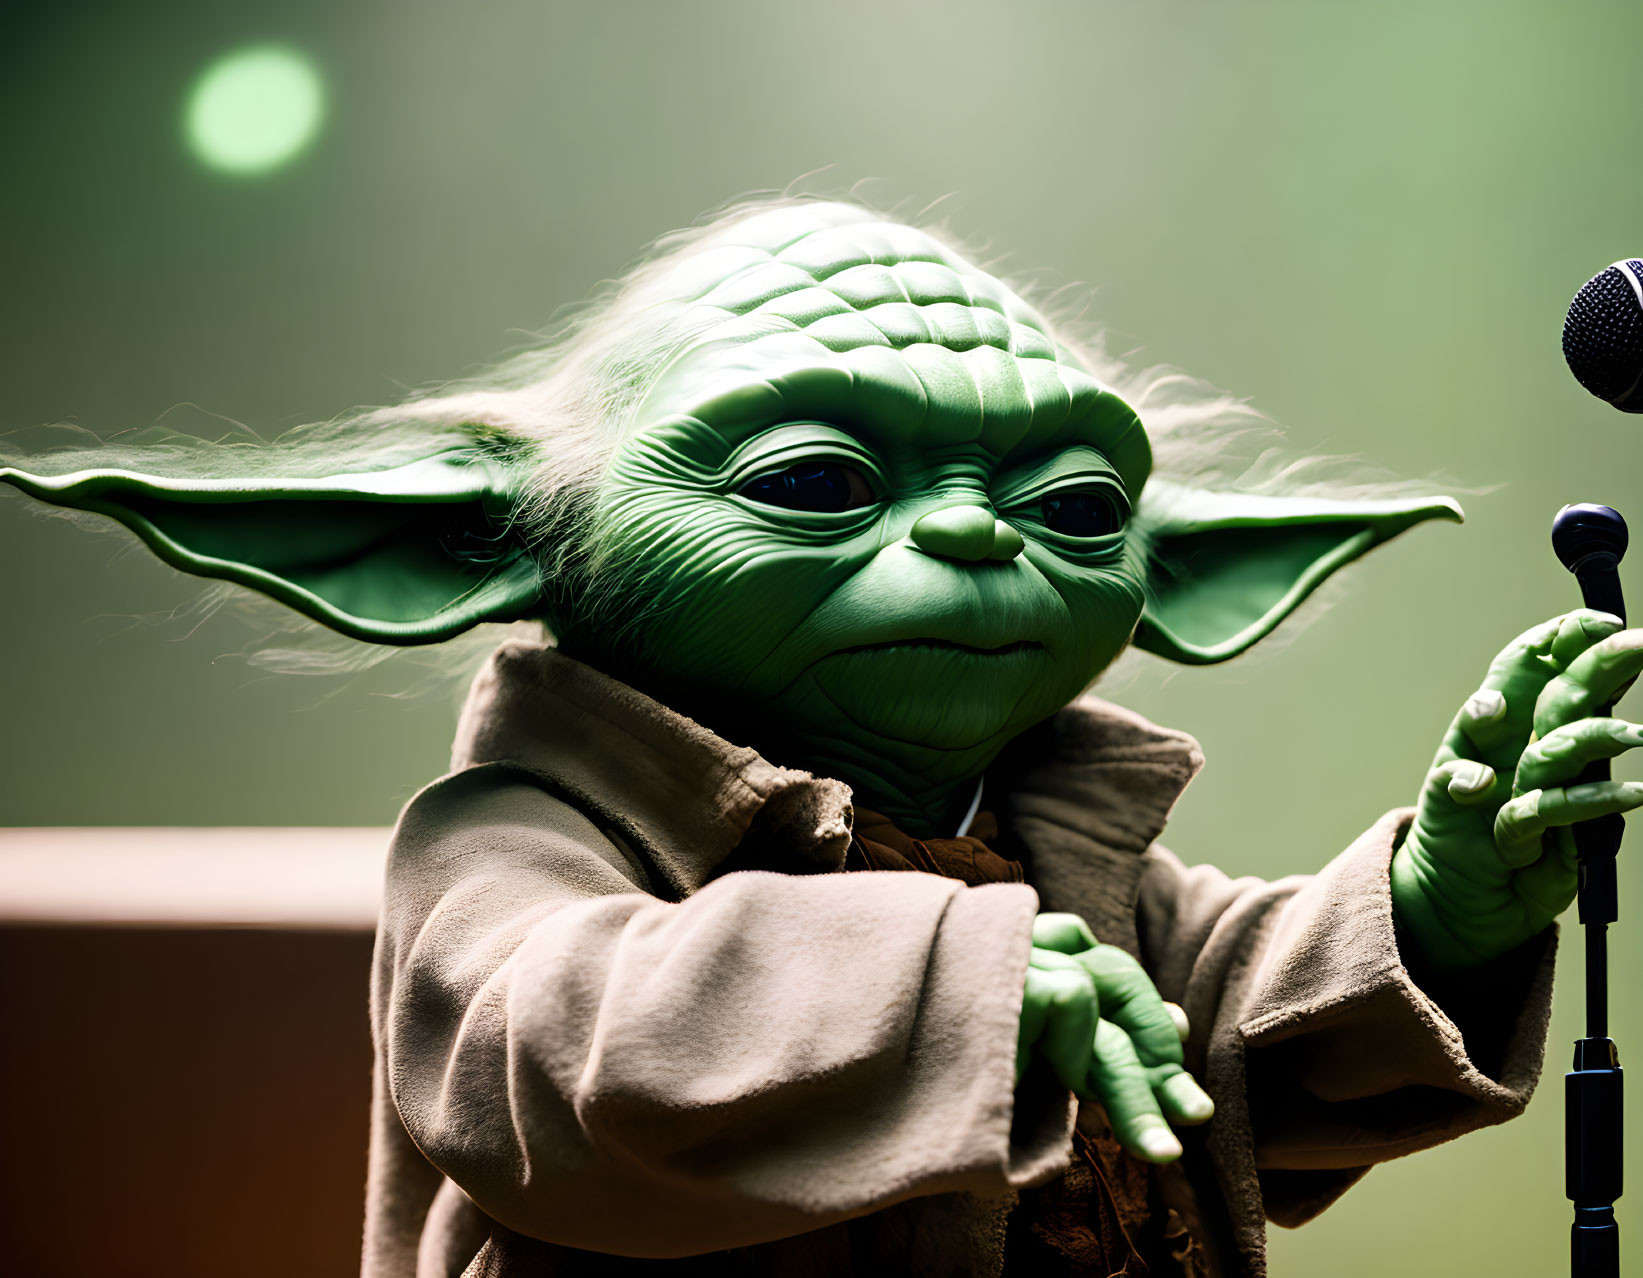 Green background figure resembling Yoda at microphone